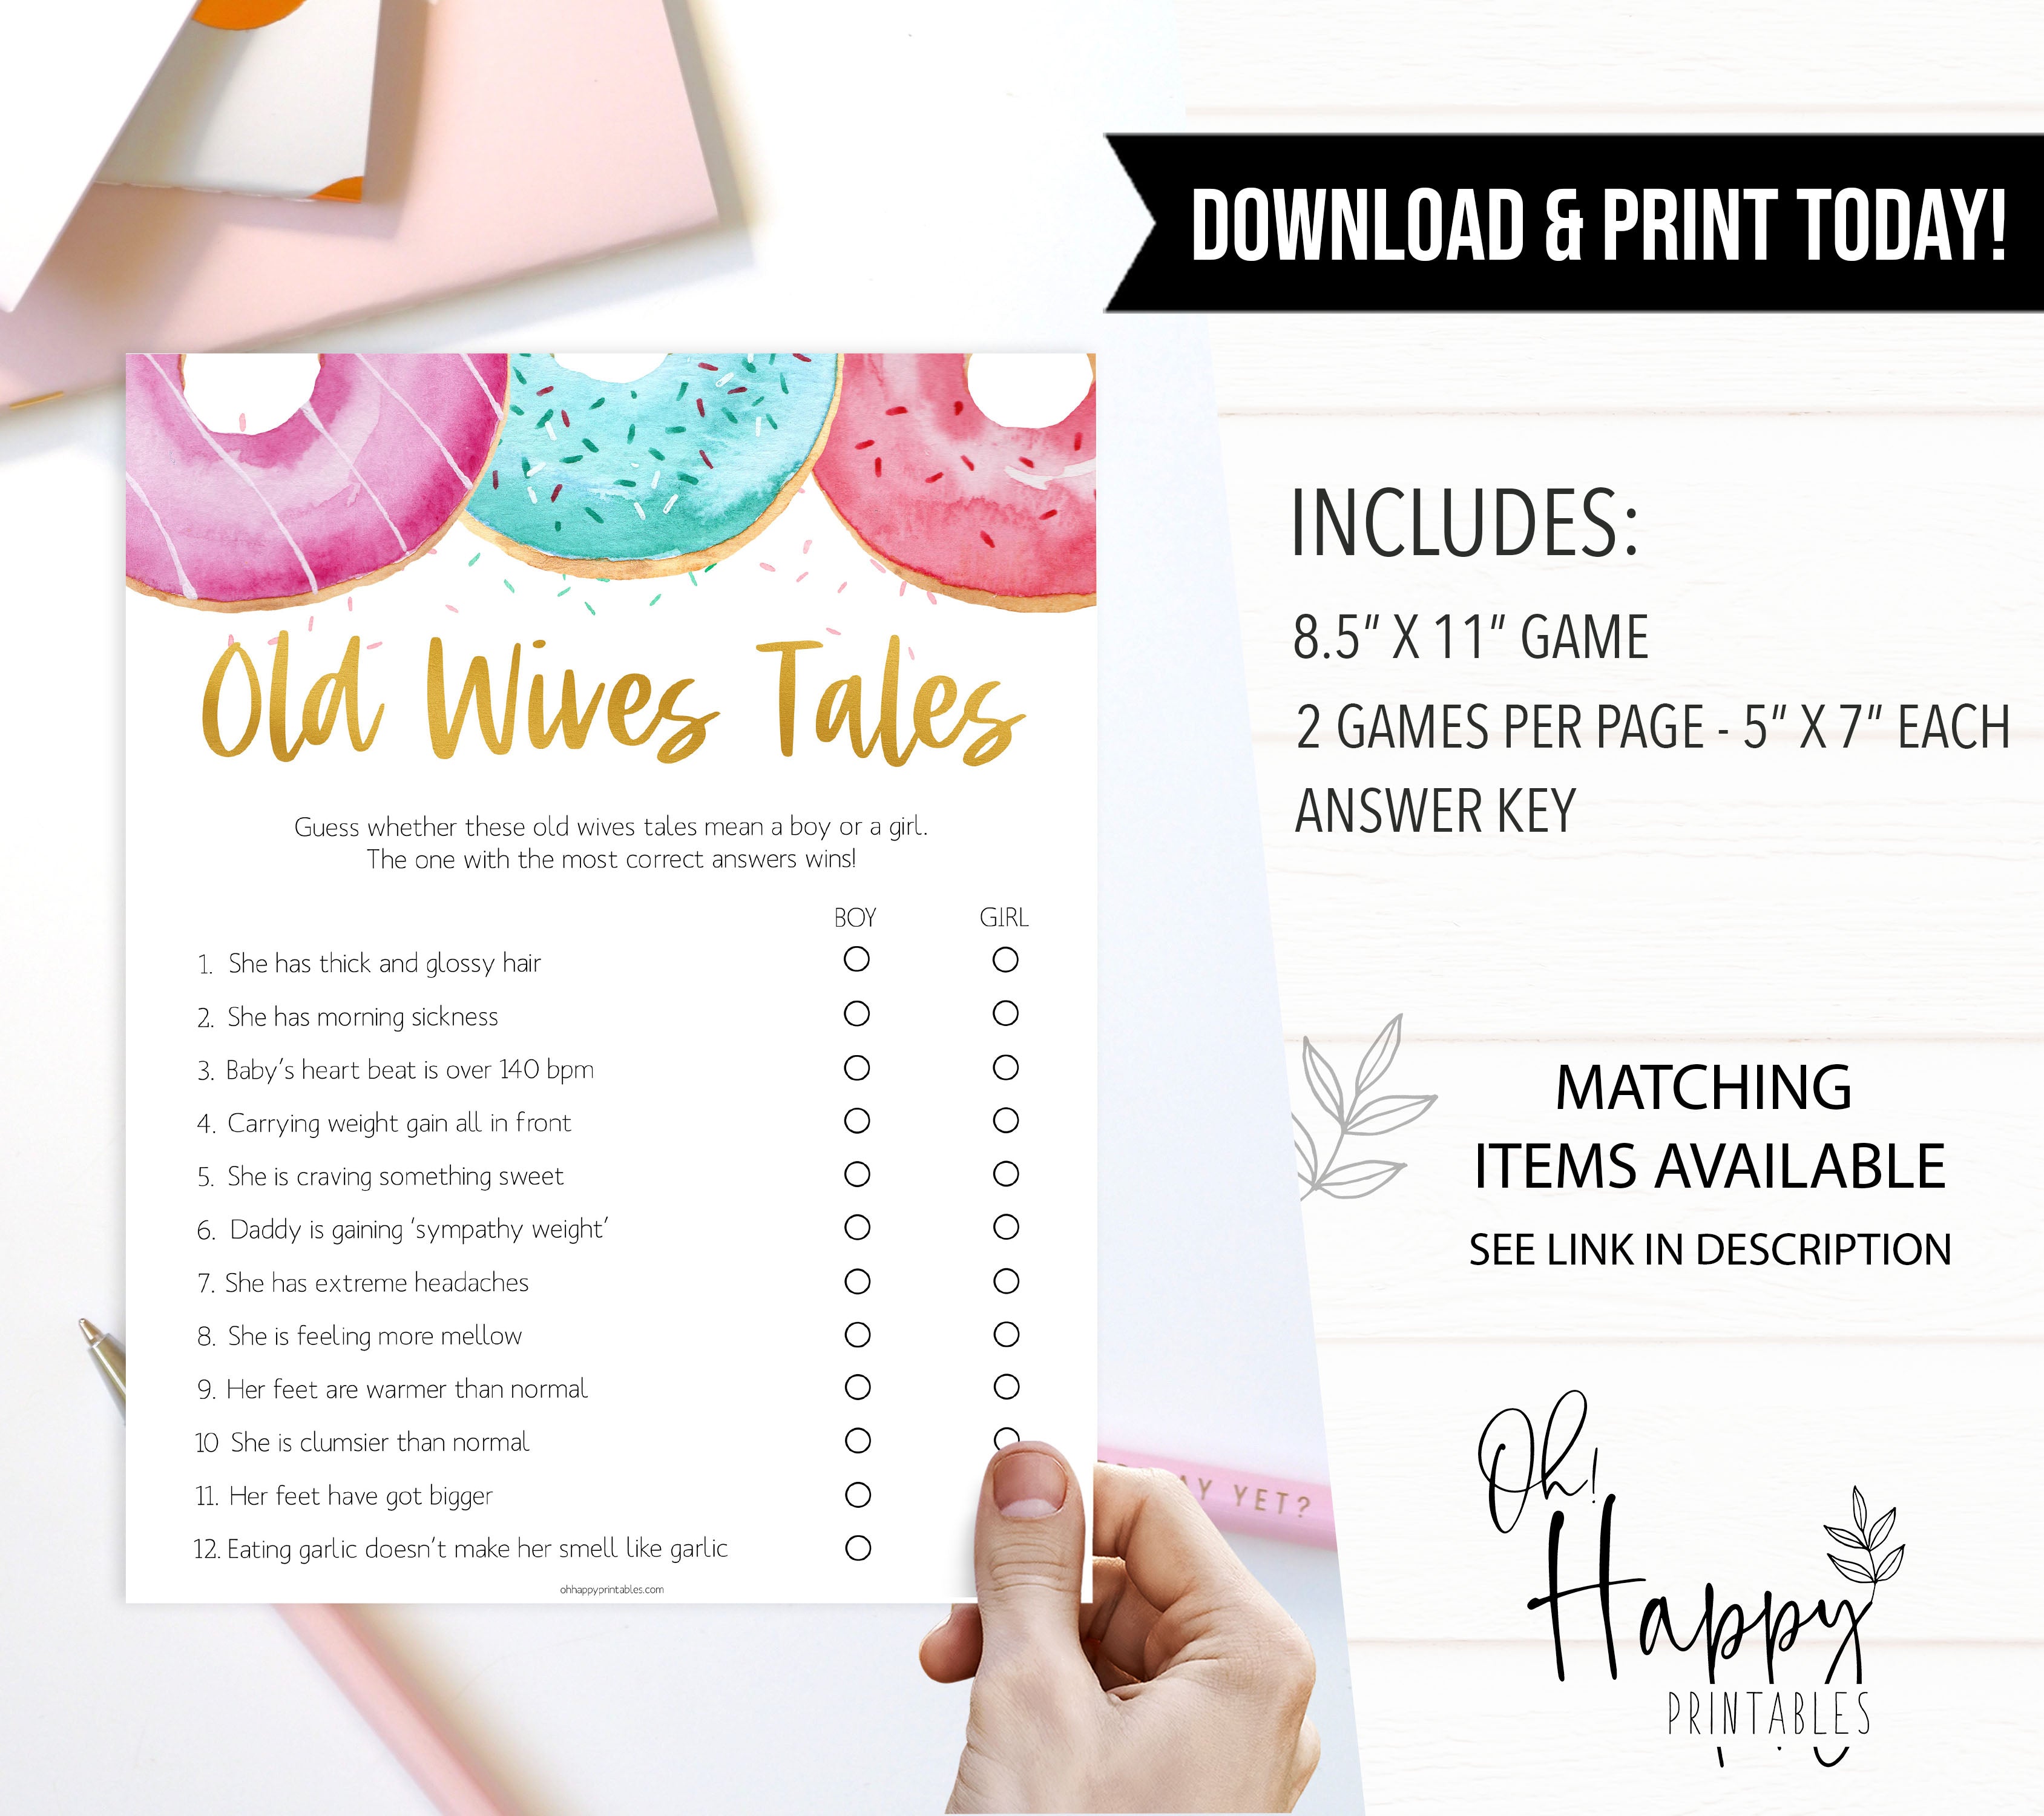 old wives tales game, Printable baby shower games, donut baby games, baby shower games, fun baby shower ideas, top baby shower ideas, donut sprinkles baby shower, baby shower games, fun donut baby shower ideas